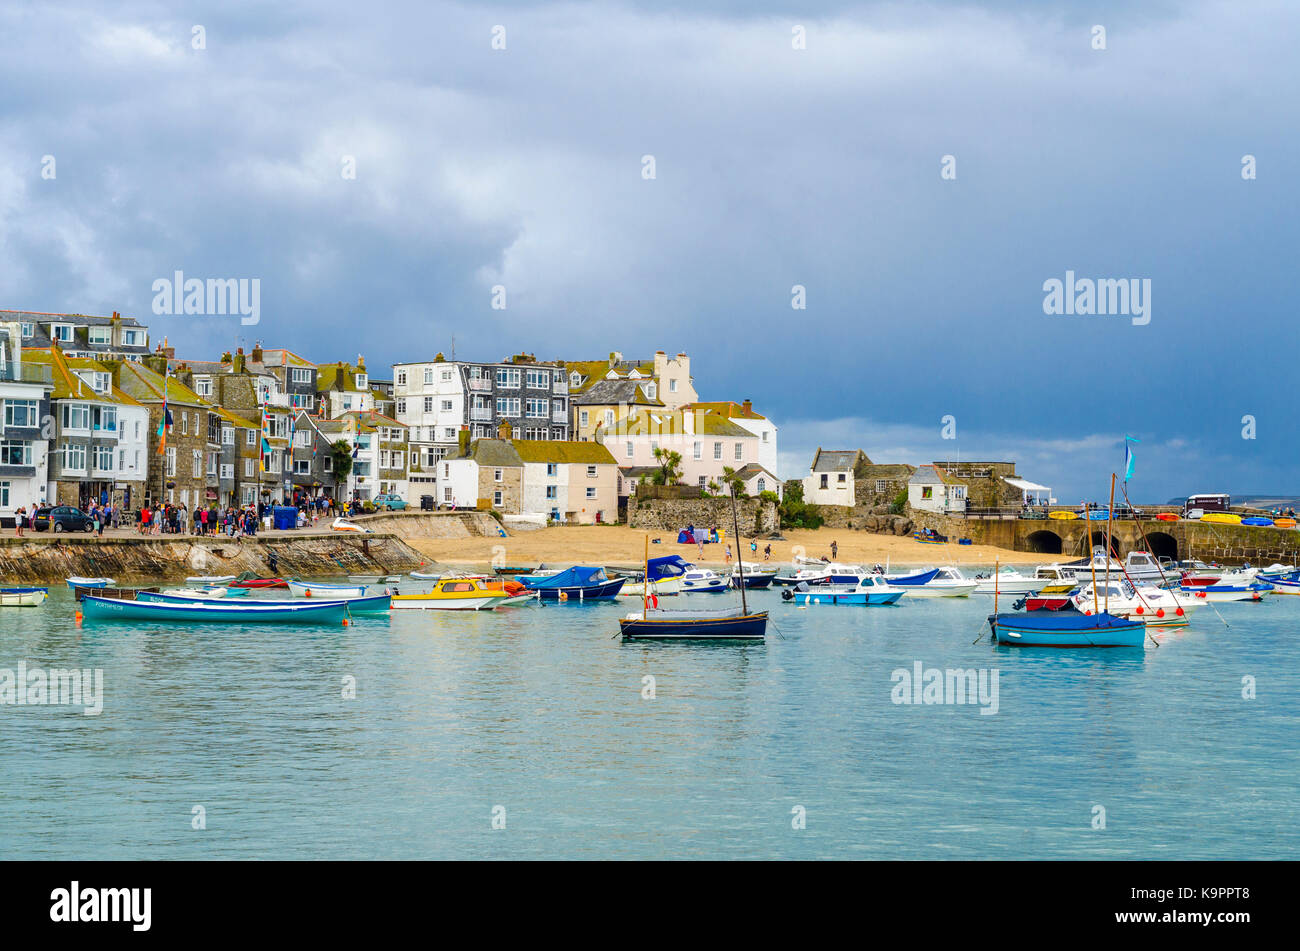 Boats moored and floating in St Ives harbour with rain clouds above. English coastal seaside town St Ives, Cornwall, England UK Stock Photo